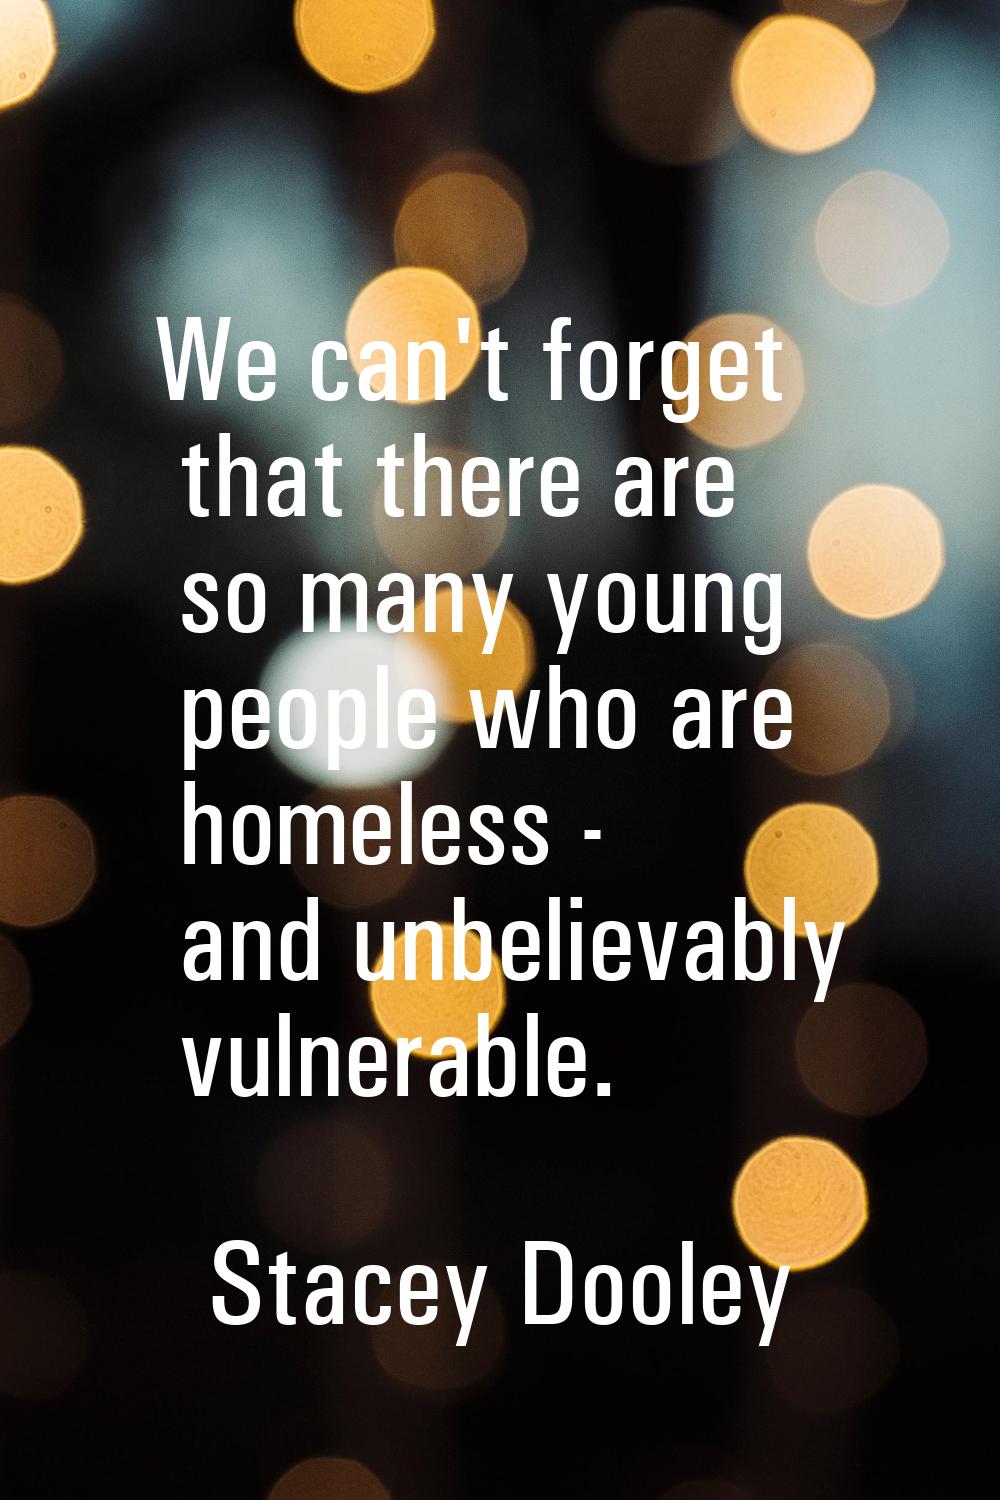 We can't forget that there are so many young people who are homeless - and unbelievably vulnerable.